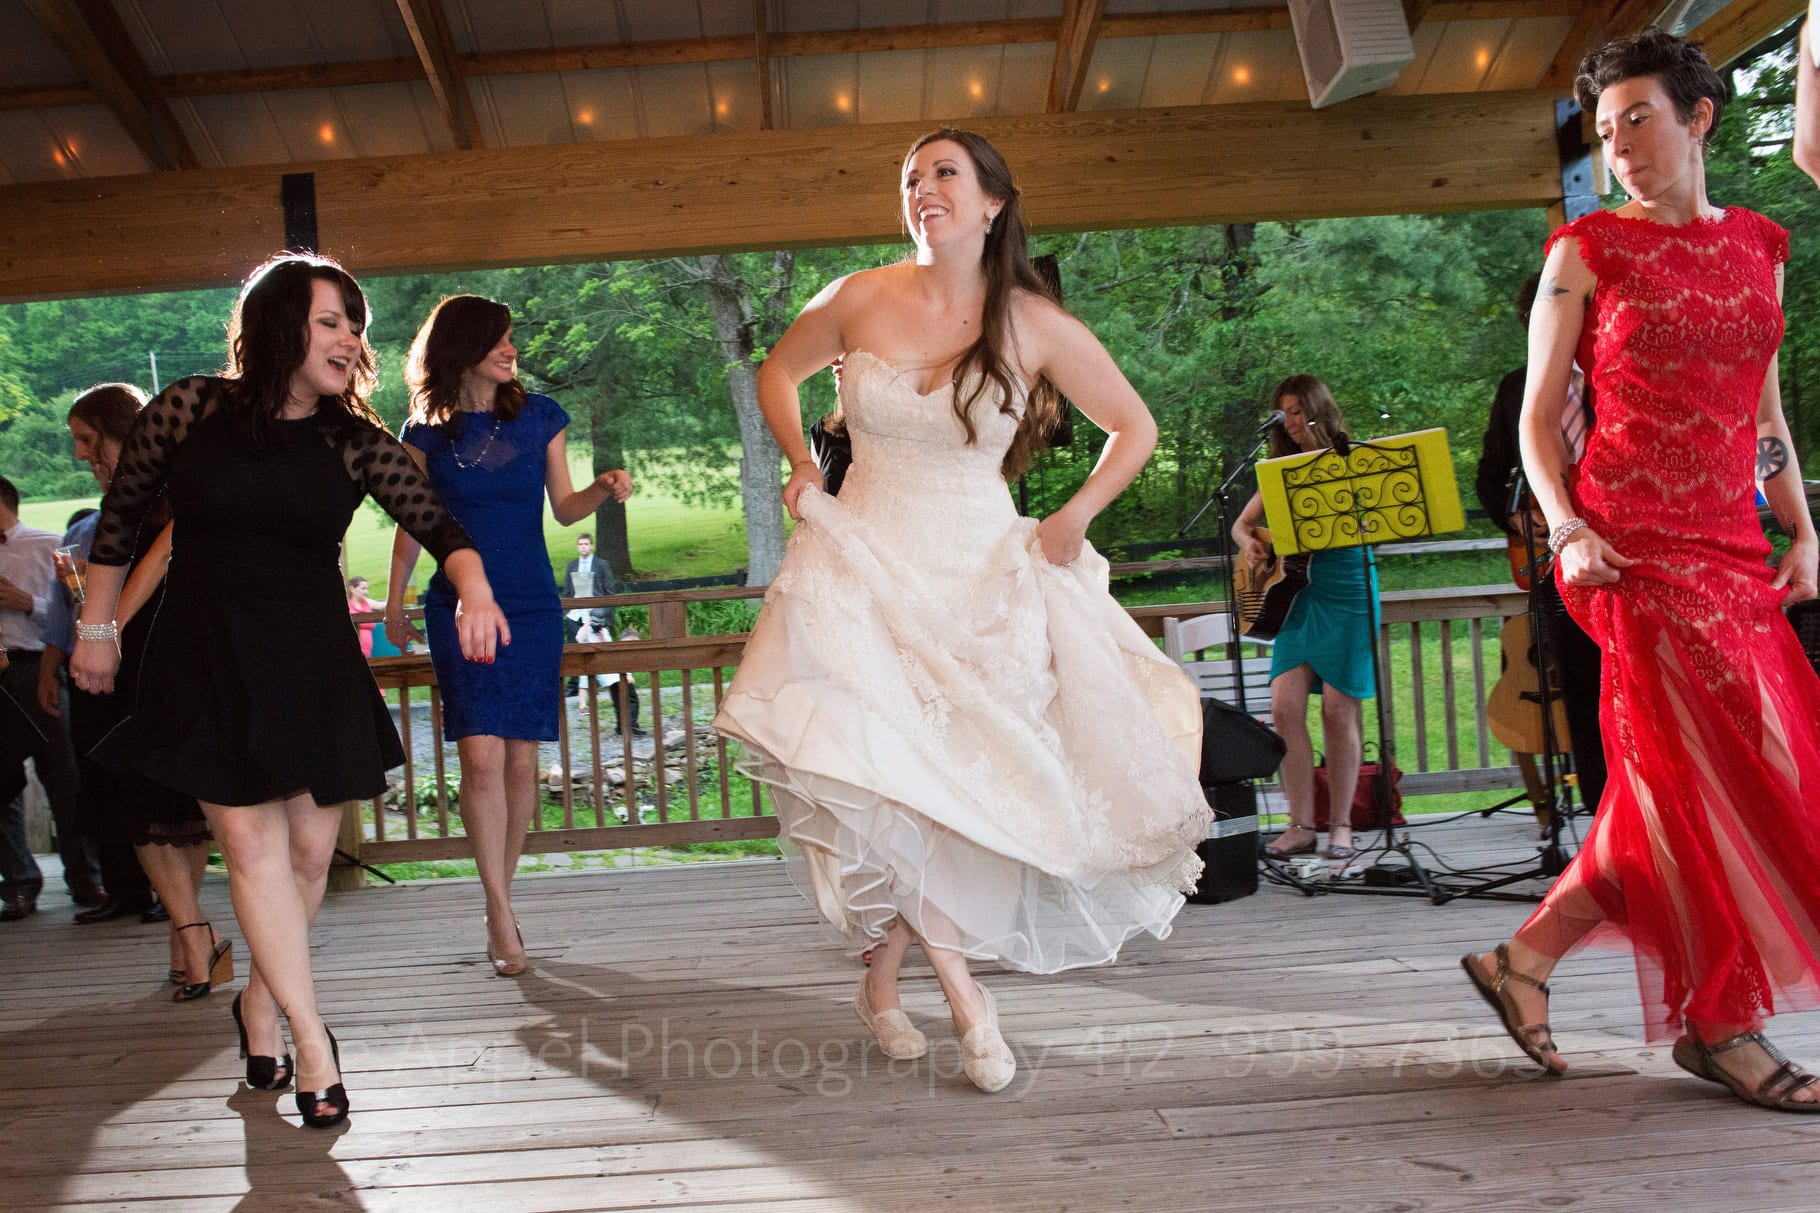 Bride dances a jig with a woman in a black dress and a woman in a red dress during their Chanteclaire Farm Wedding.